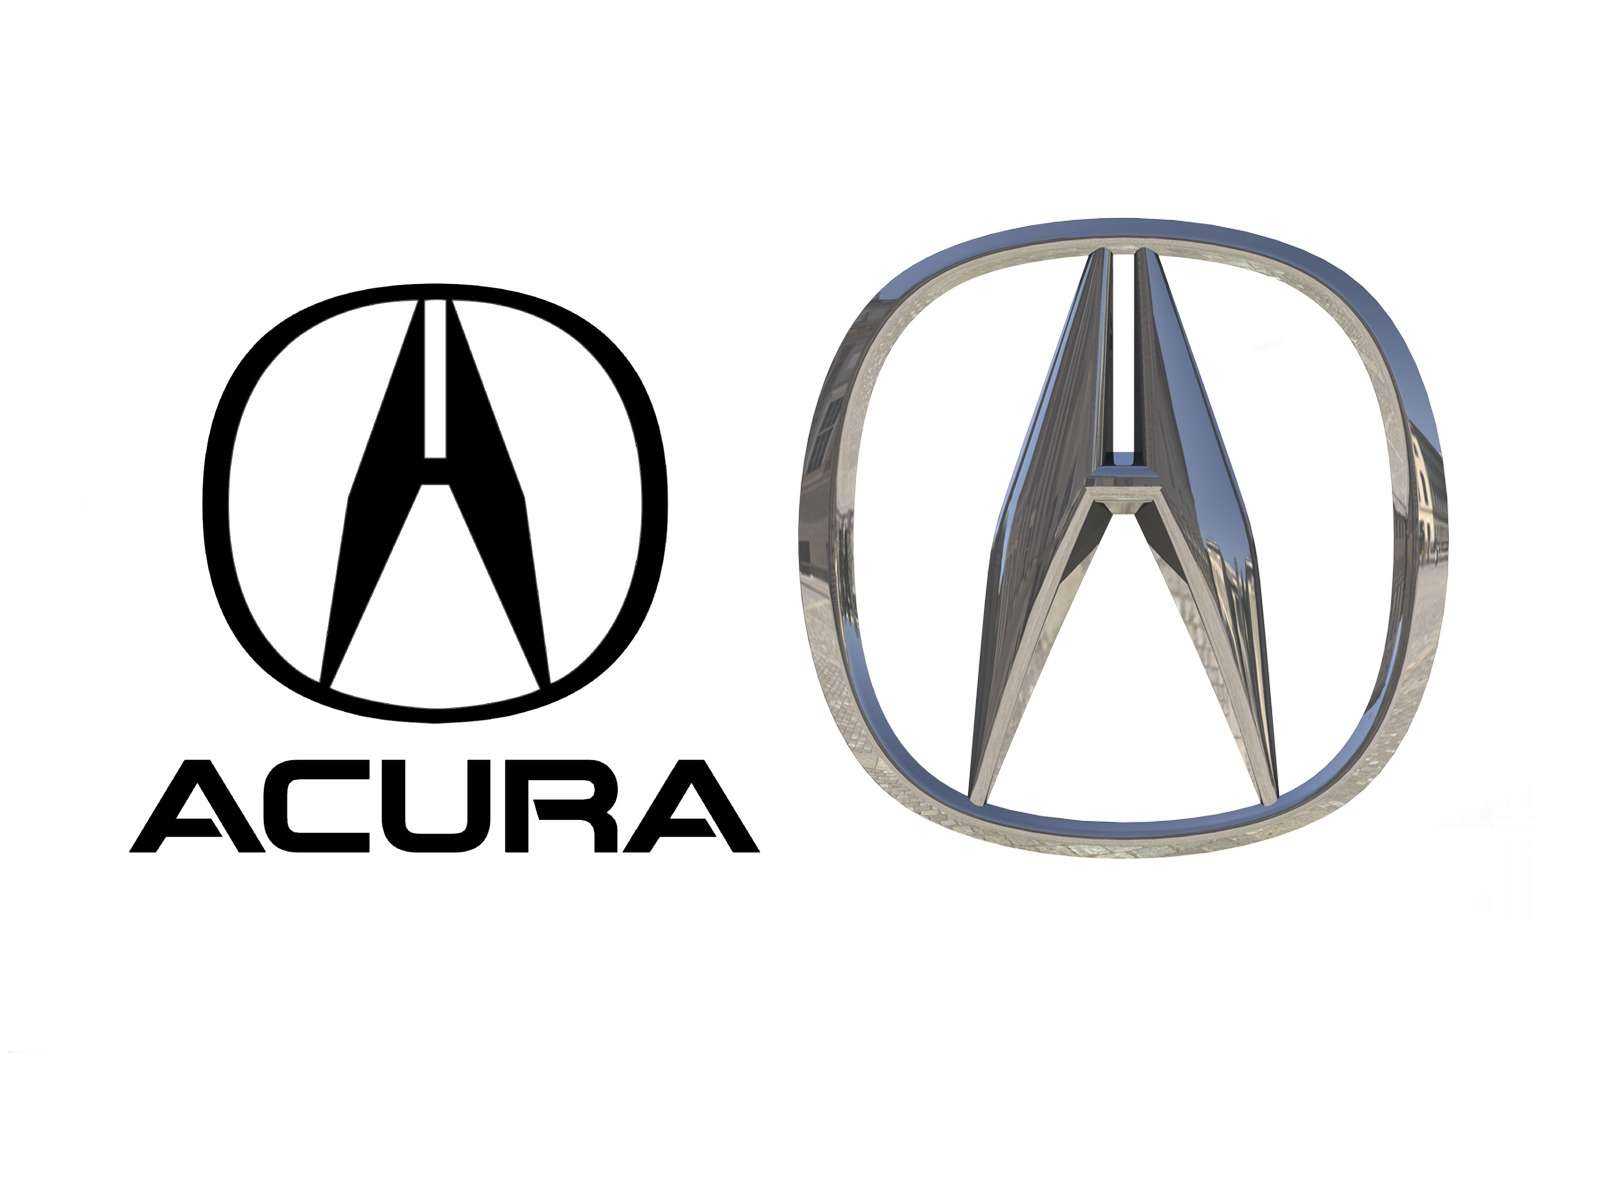 What brand is acura